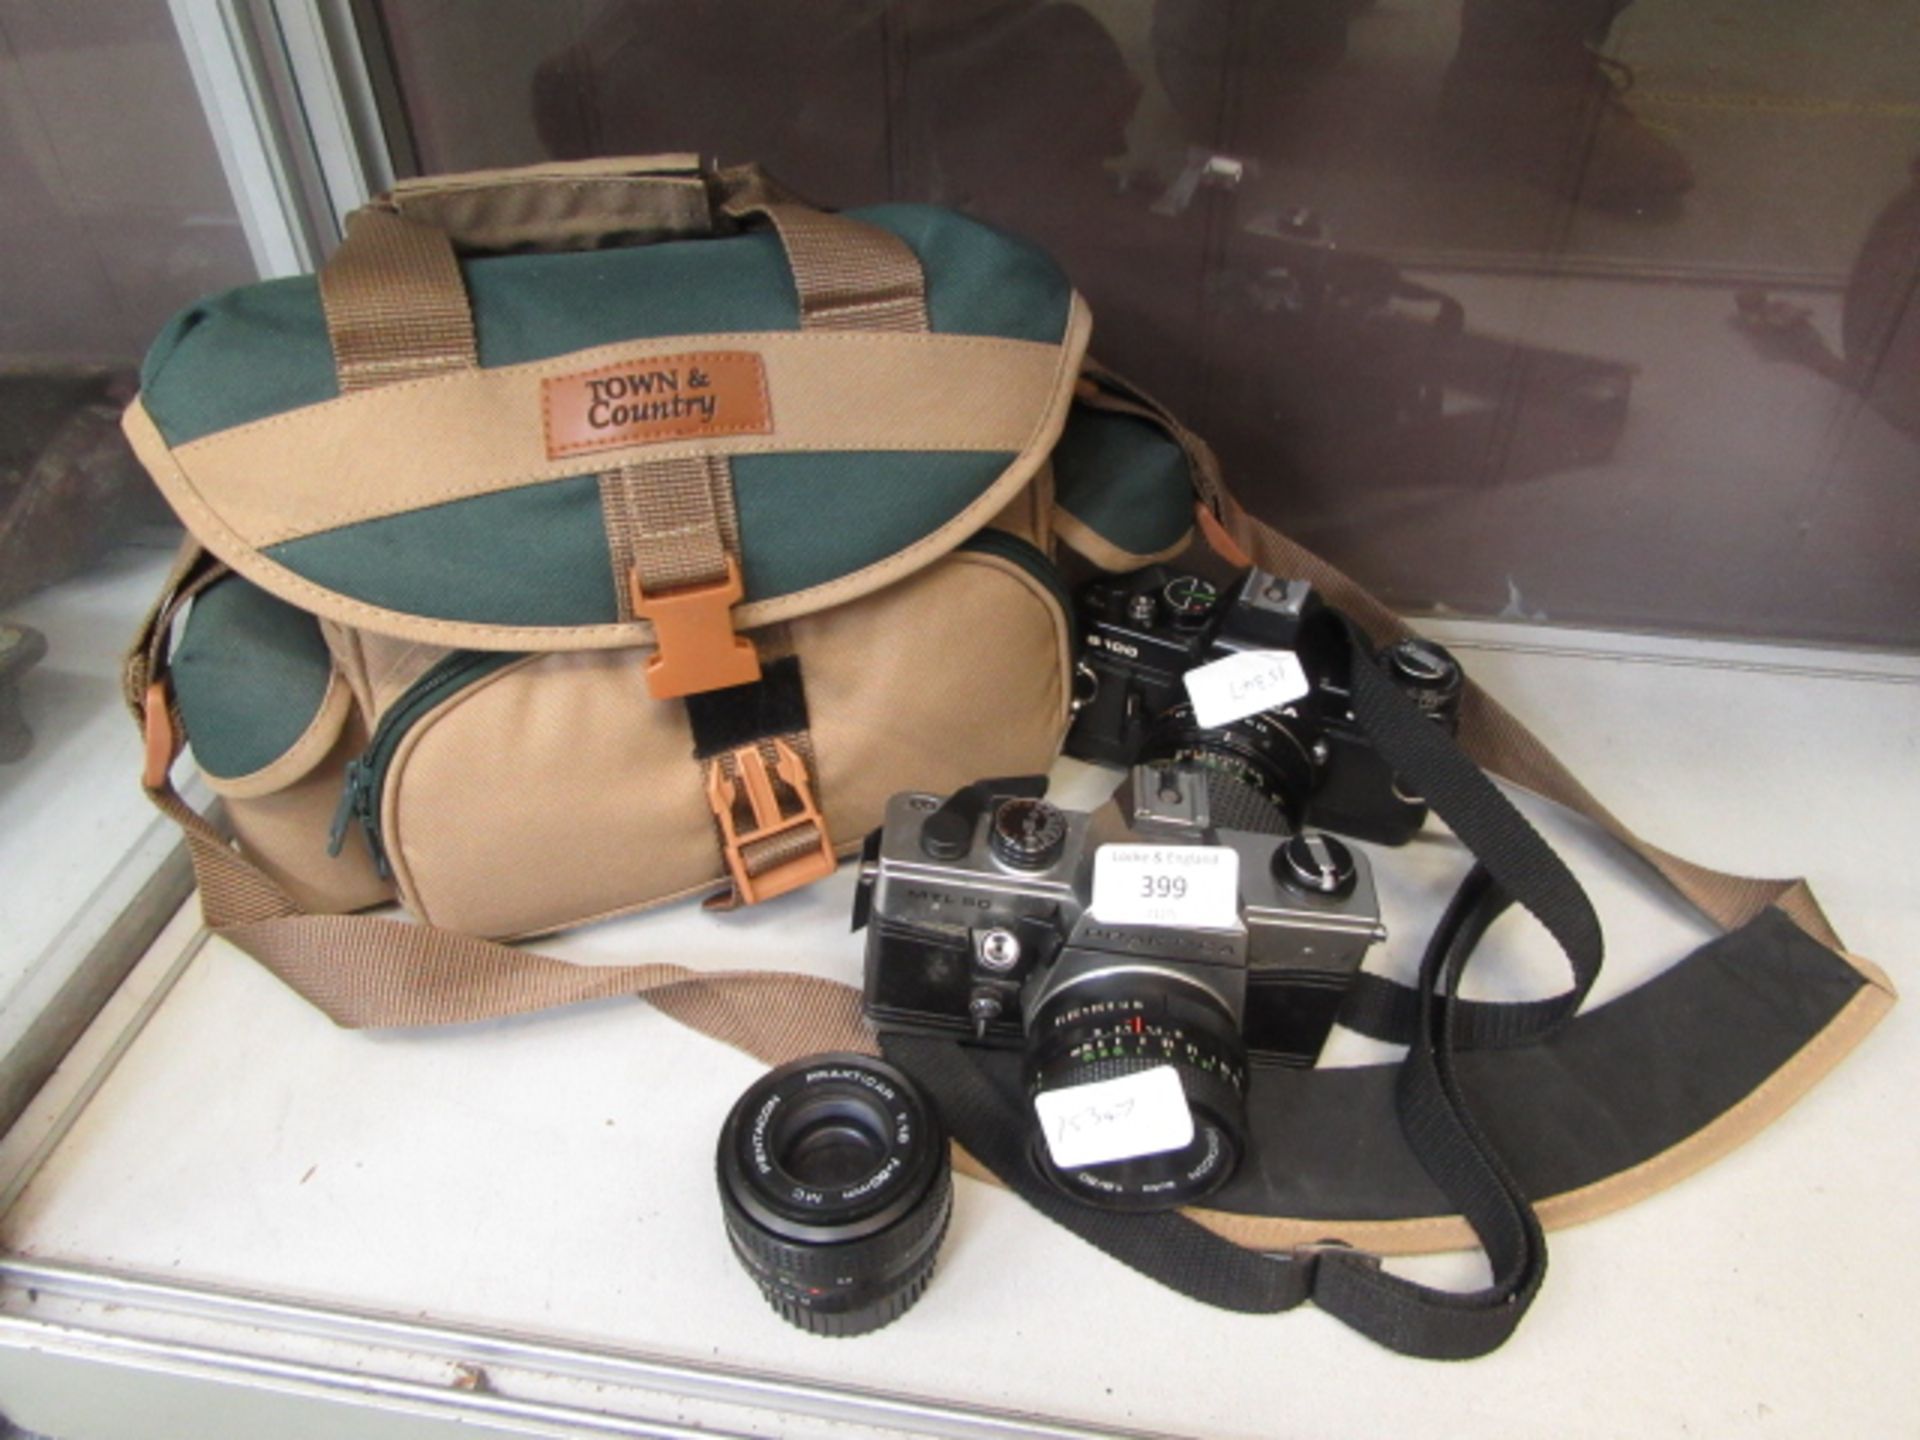 Two cameras and one lens together with a cased JVC video camera